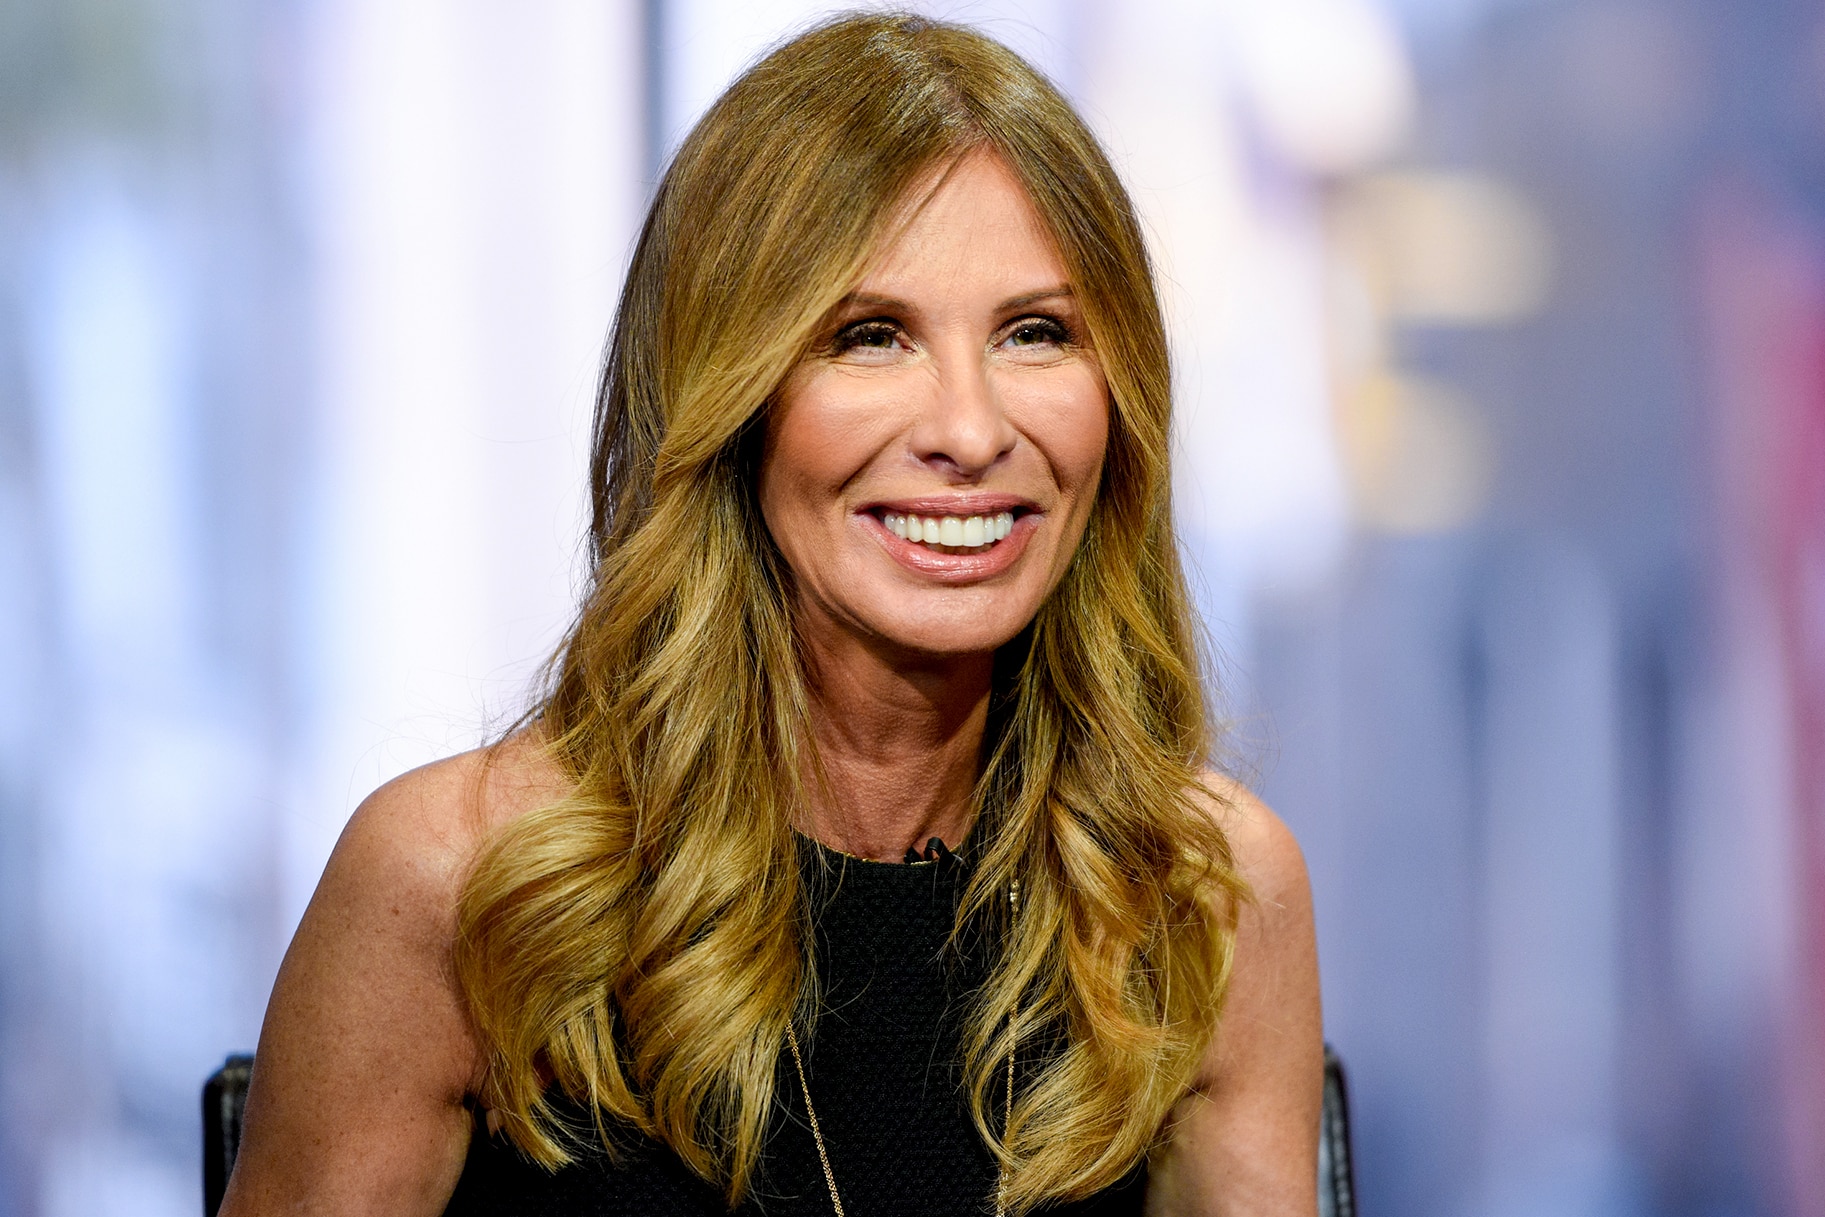 Carole Radziwill Things You Didnt Know About RHONY Author The Daily Dish pic